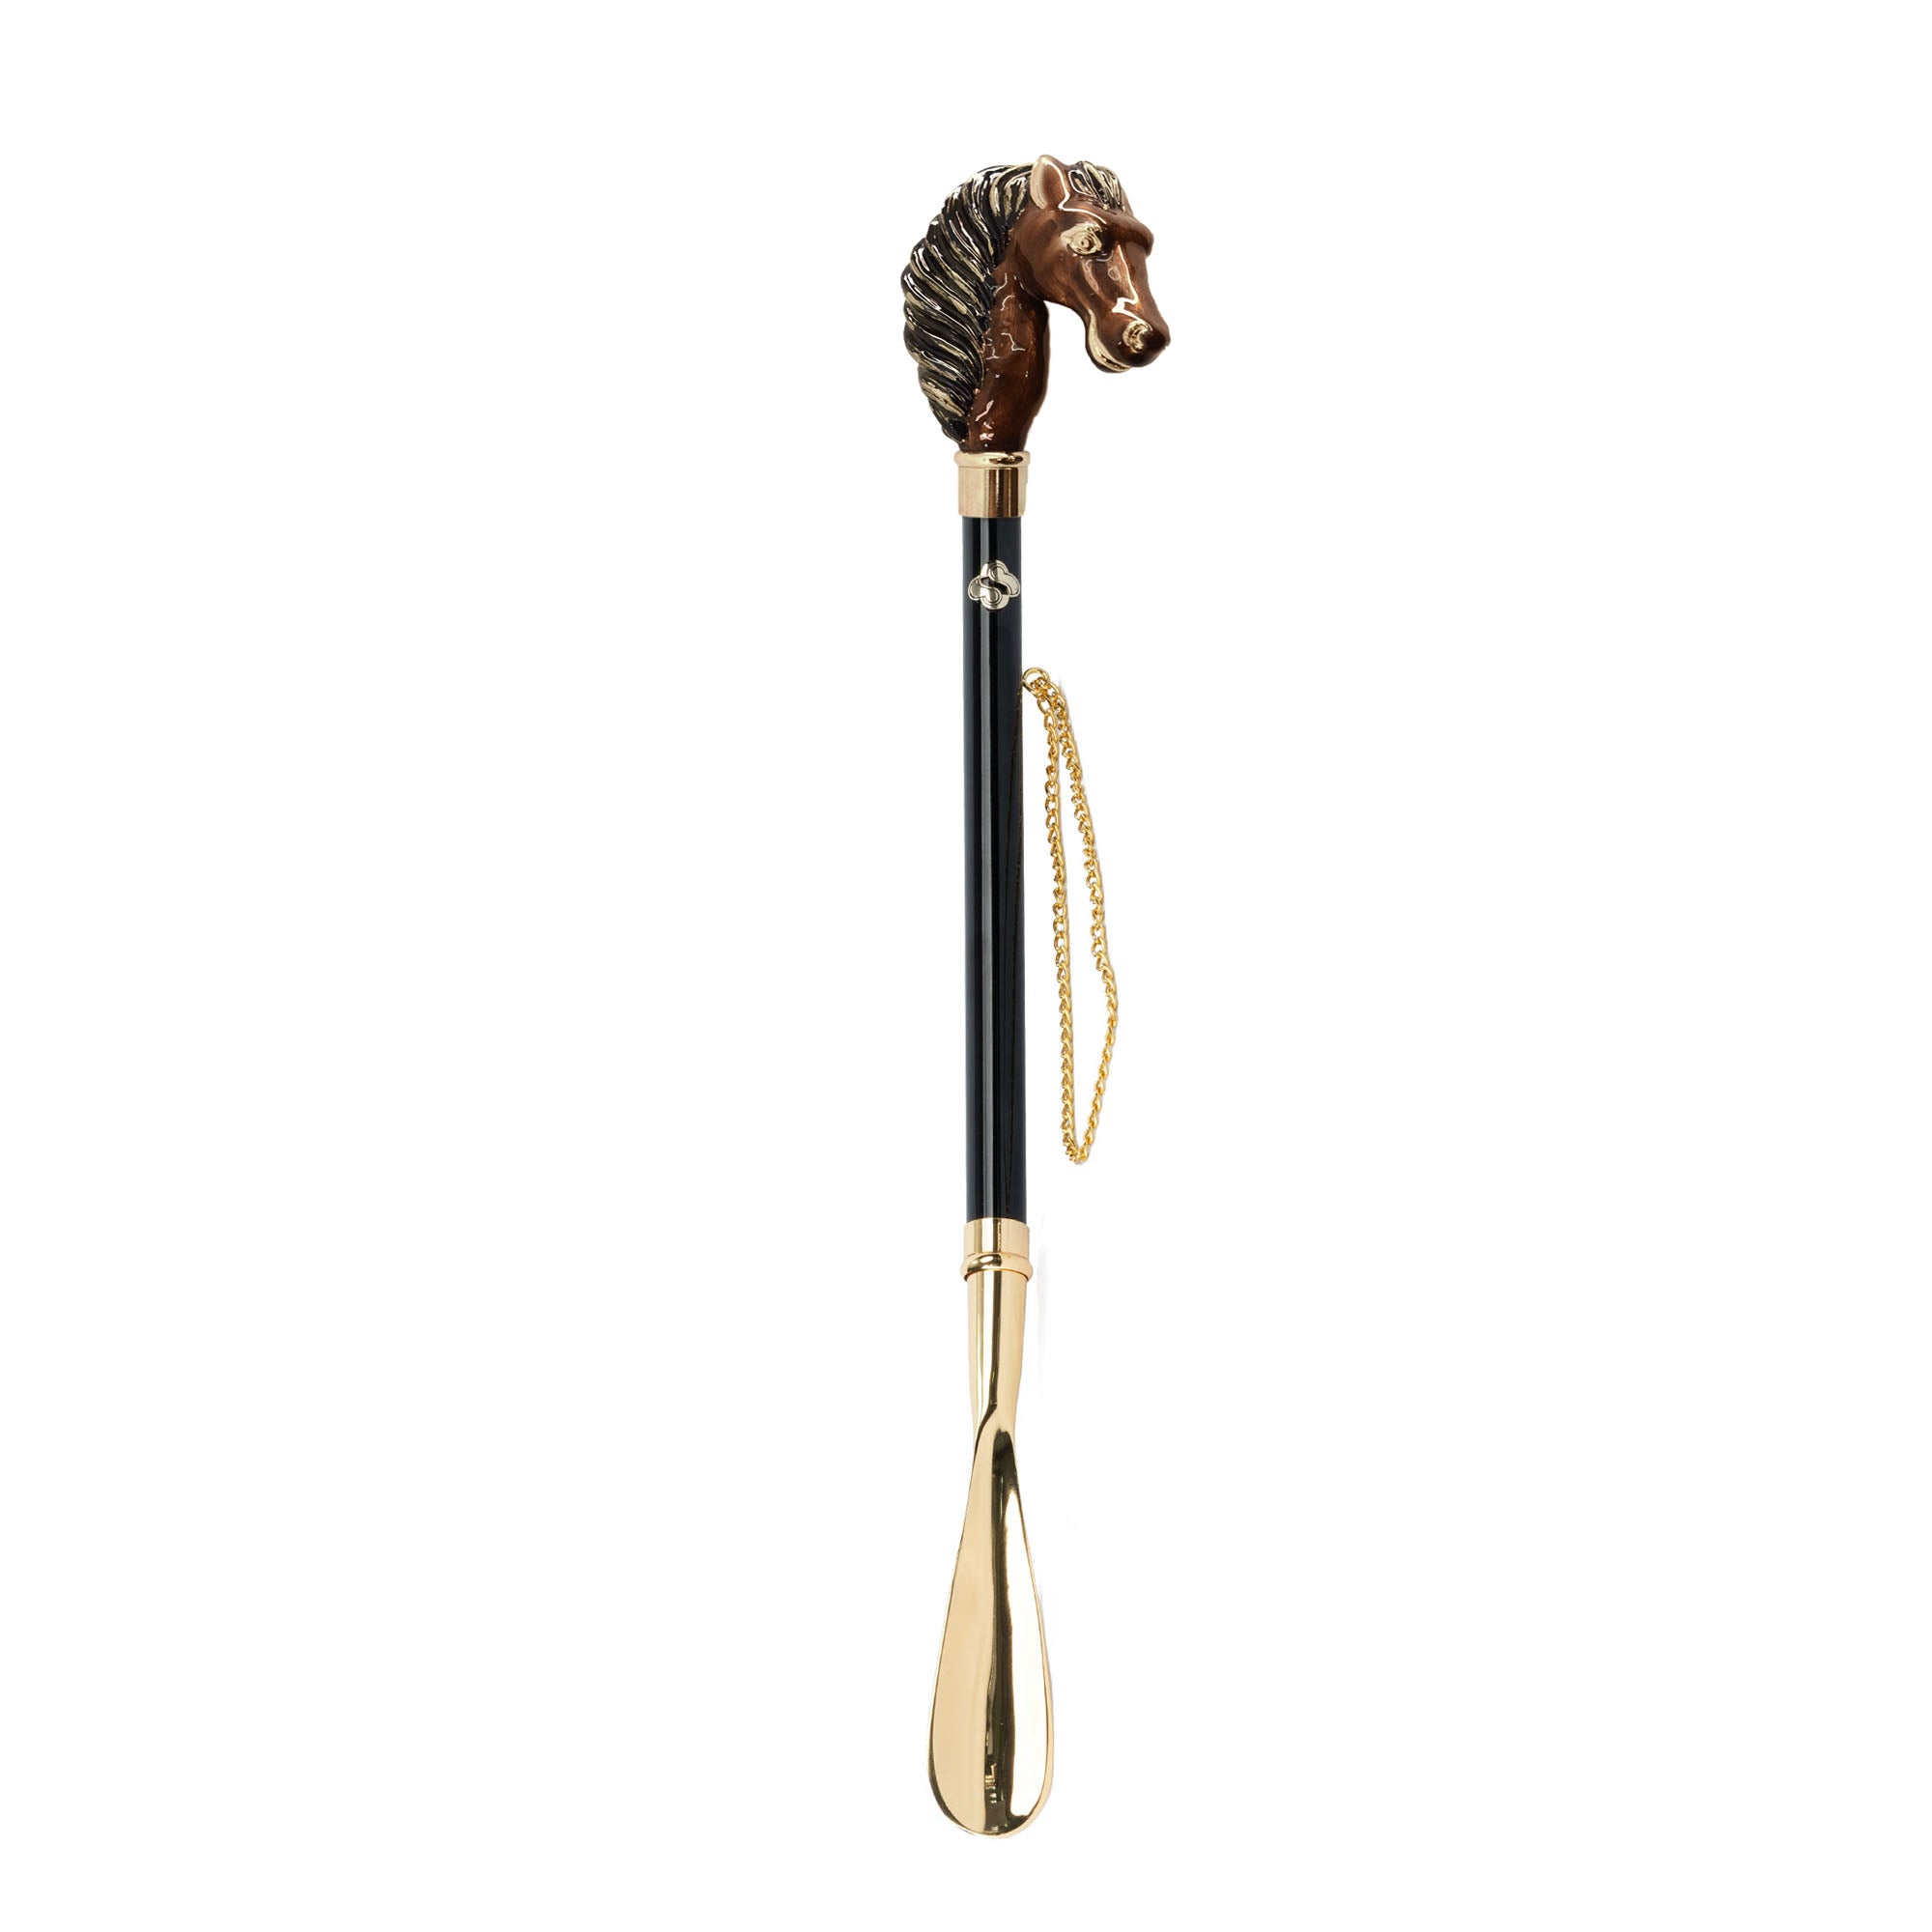 Horse Harmony: Hand-Painted 24K Gold-Plated Horse Shoehorn